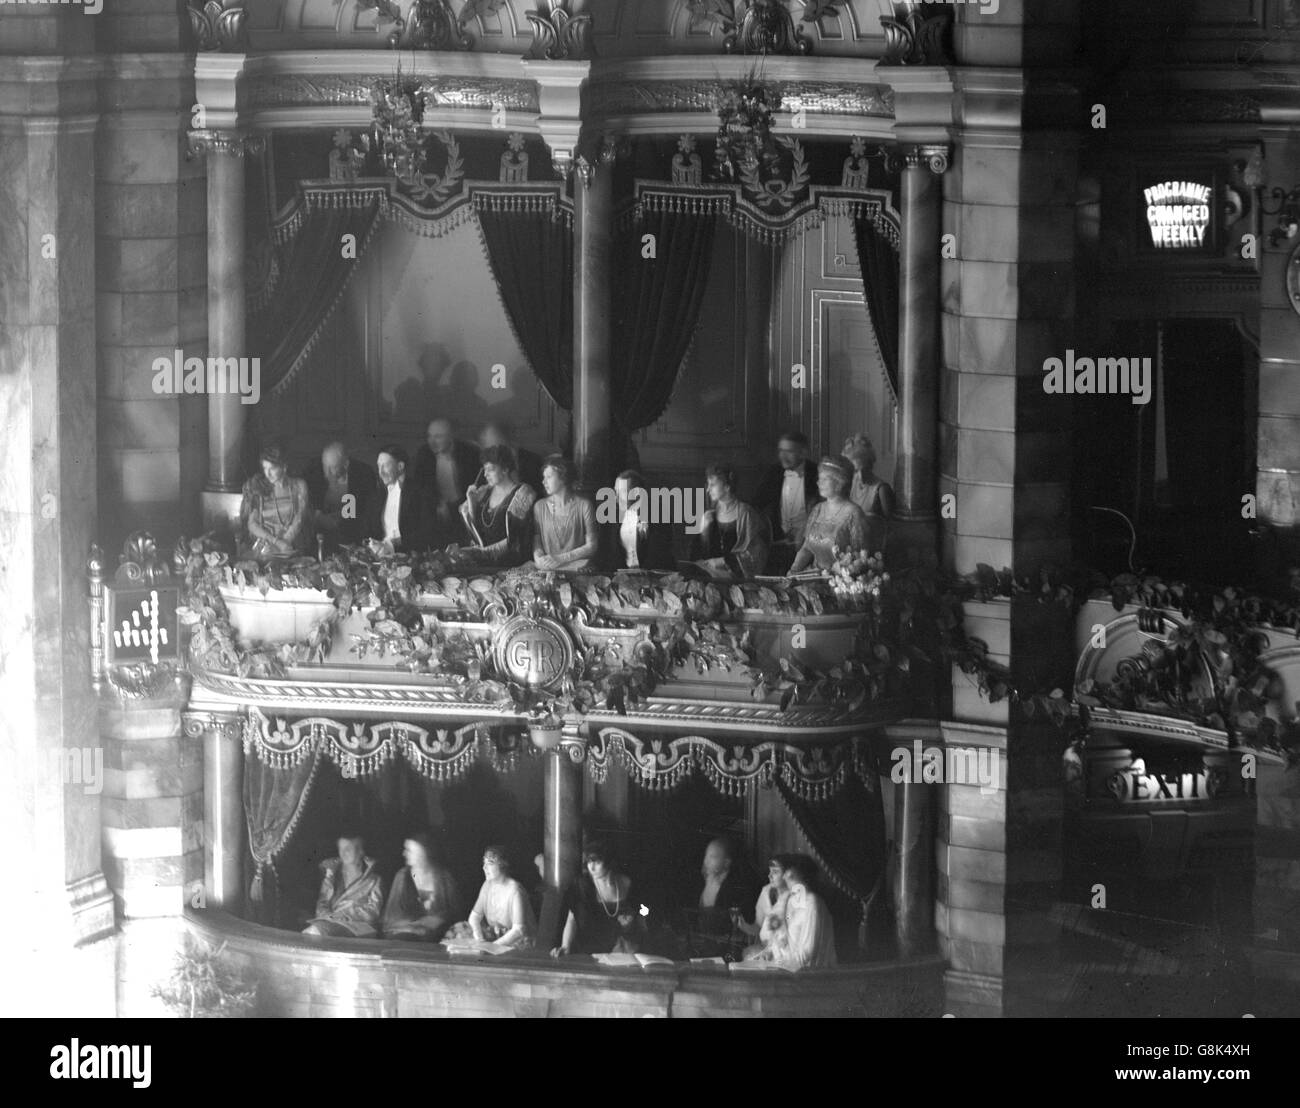 King George V and Queen Mary attend the Royal performance at the London Coliseum. In addition to the King and Queen, the Royal party included Princess Mary and Viscount Lascelles, the Queen of Norway and Princess Victoria. Stock Photo